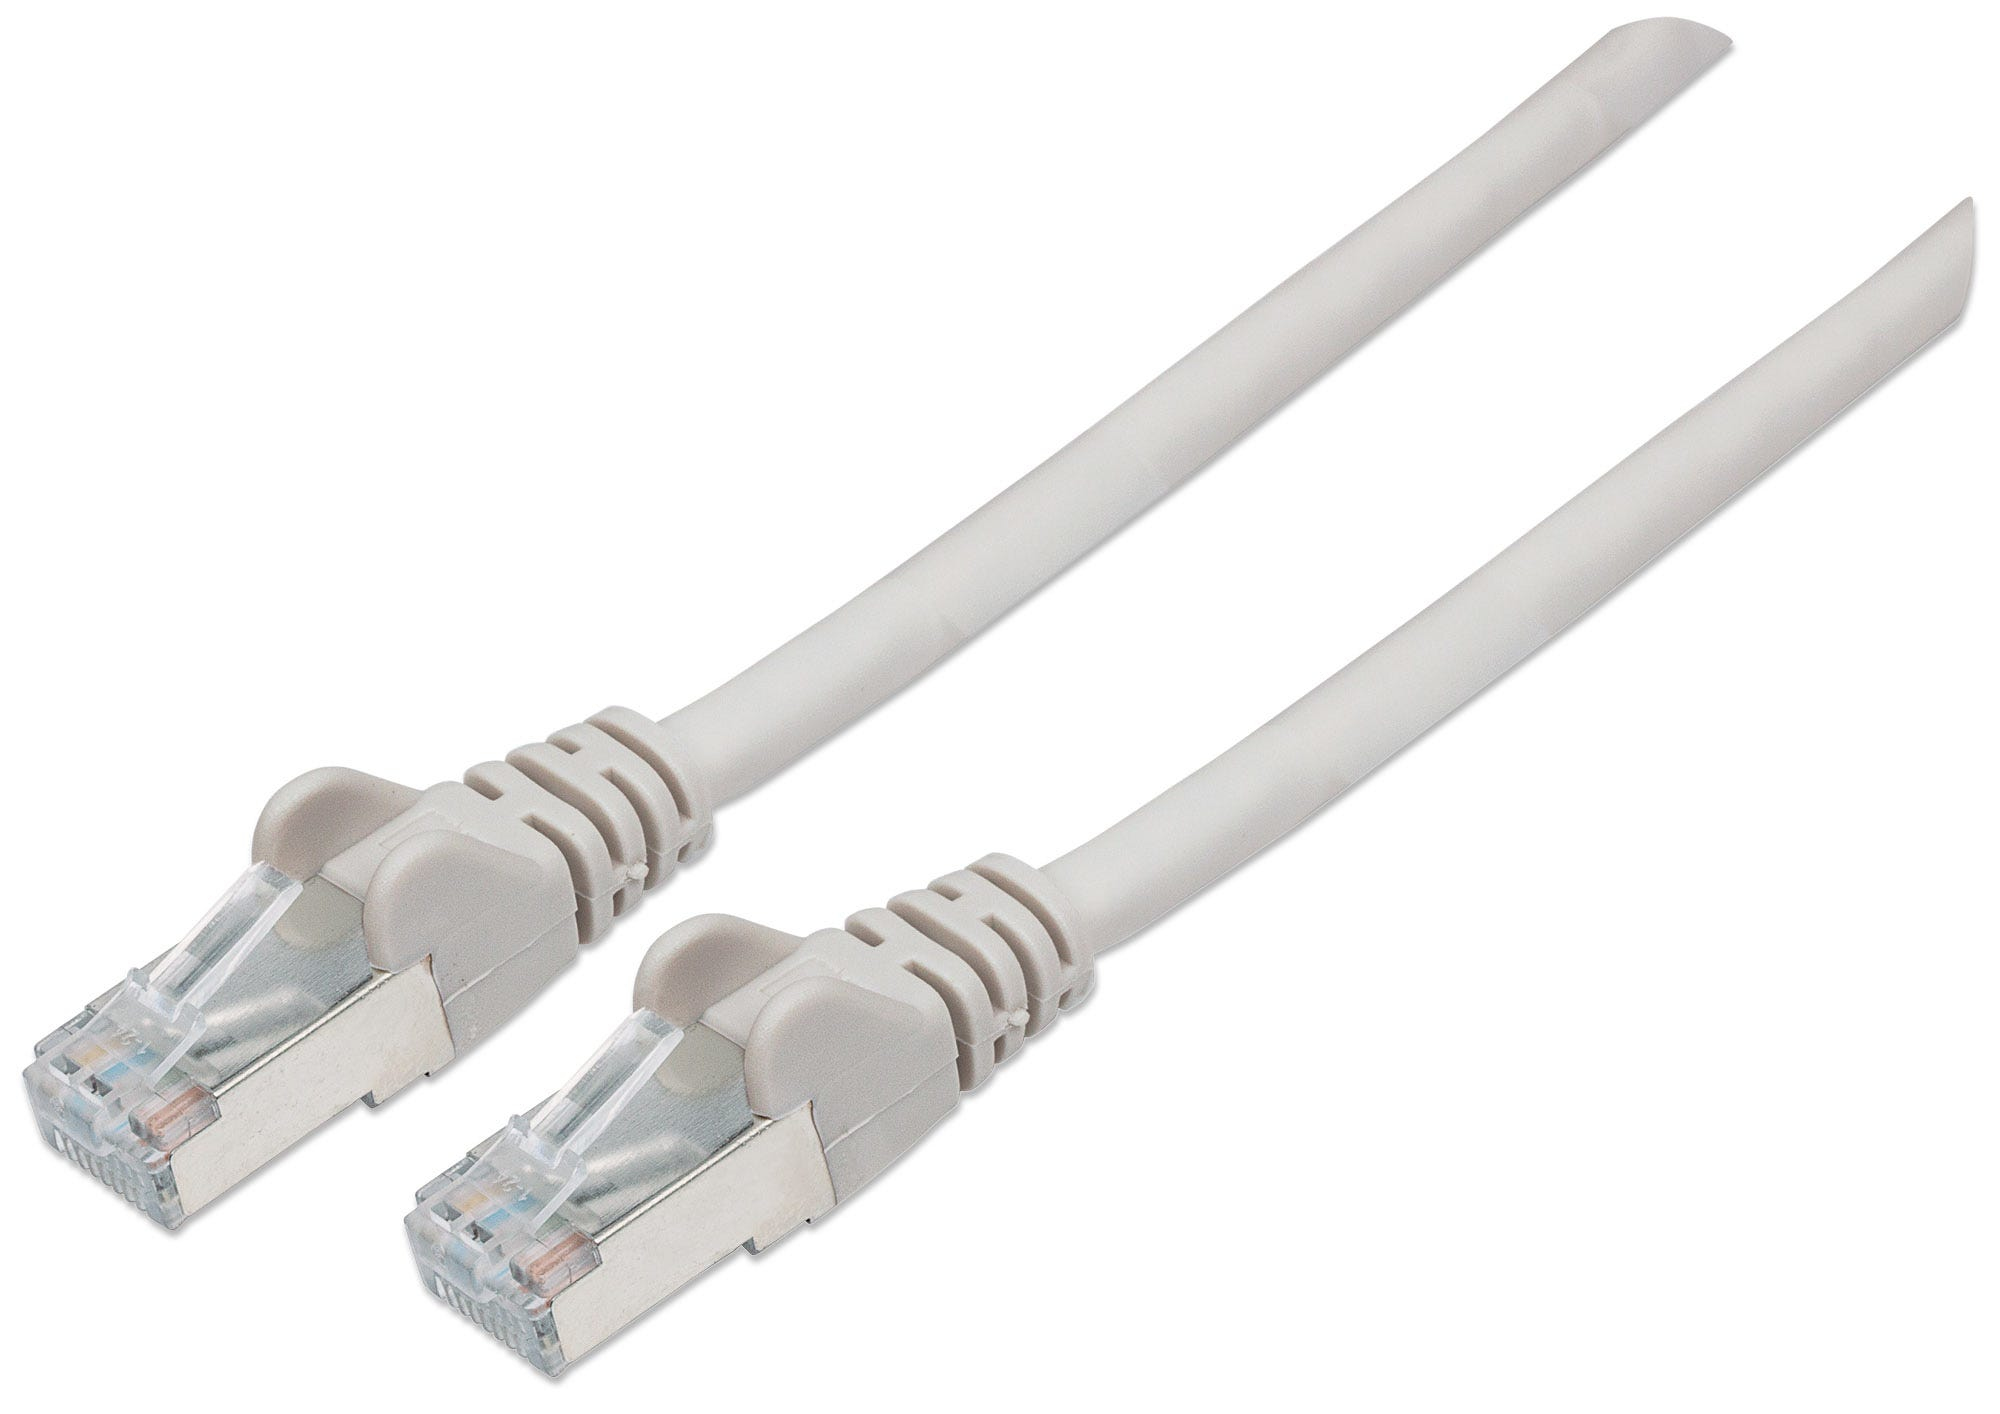 Intellinet Network Patch Cable, Cat6, 7.5m, Grey, Copper, S/FTP, LSOH / LSZH, PVC, RJ45, Gold Plated Contacts, Snagless, Booted, Polybag - Patch-Kabel - RJ-45 (M)